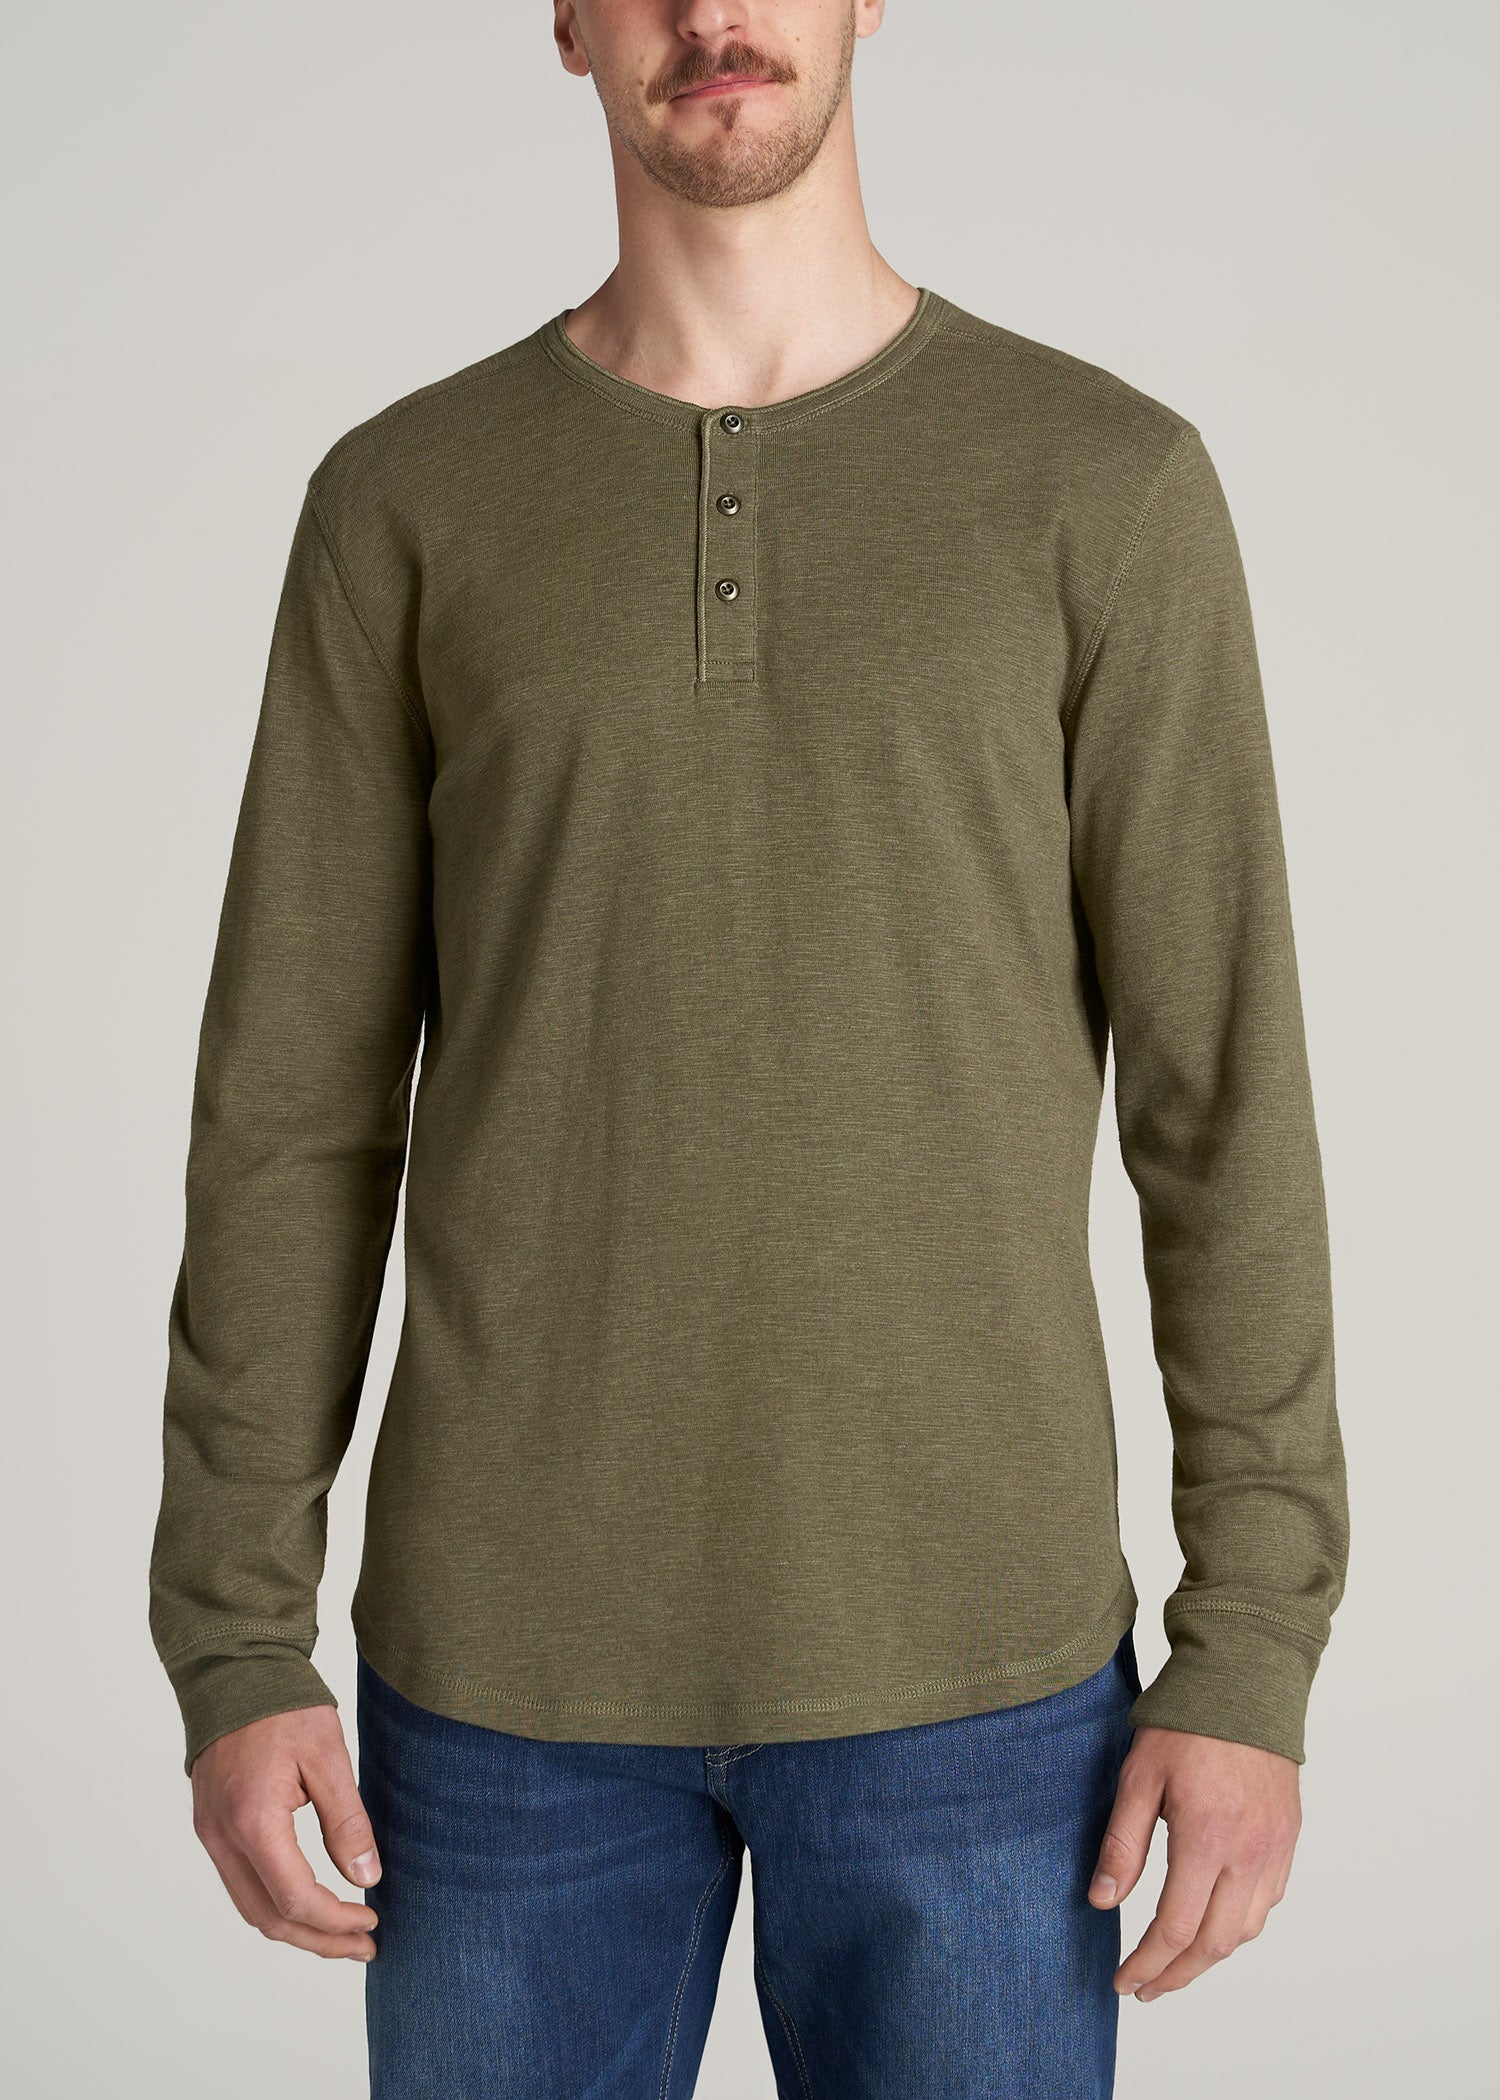 Tall Long Sleeve Shirts for Men 6'3